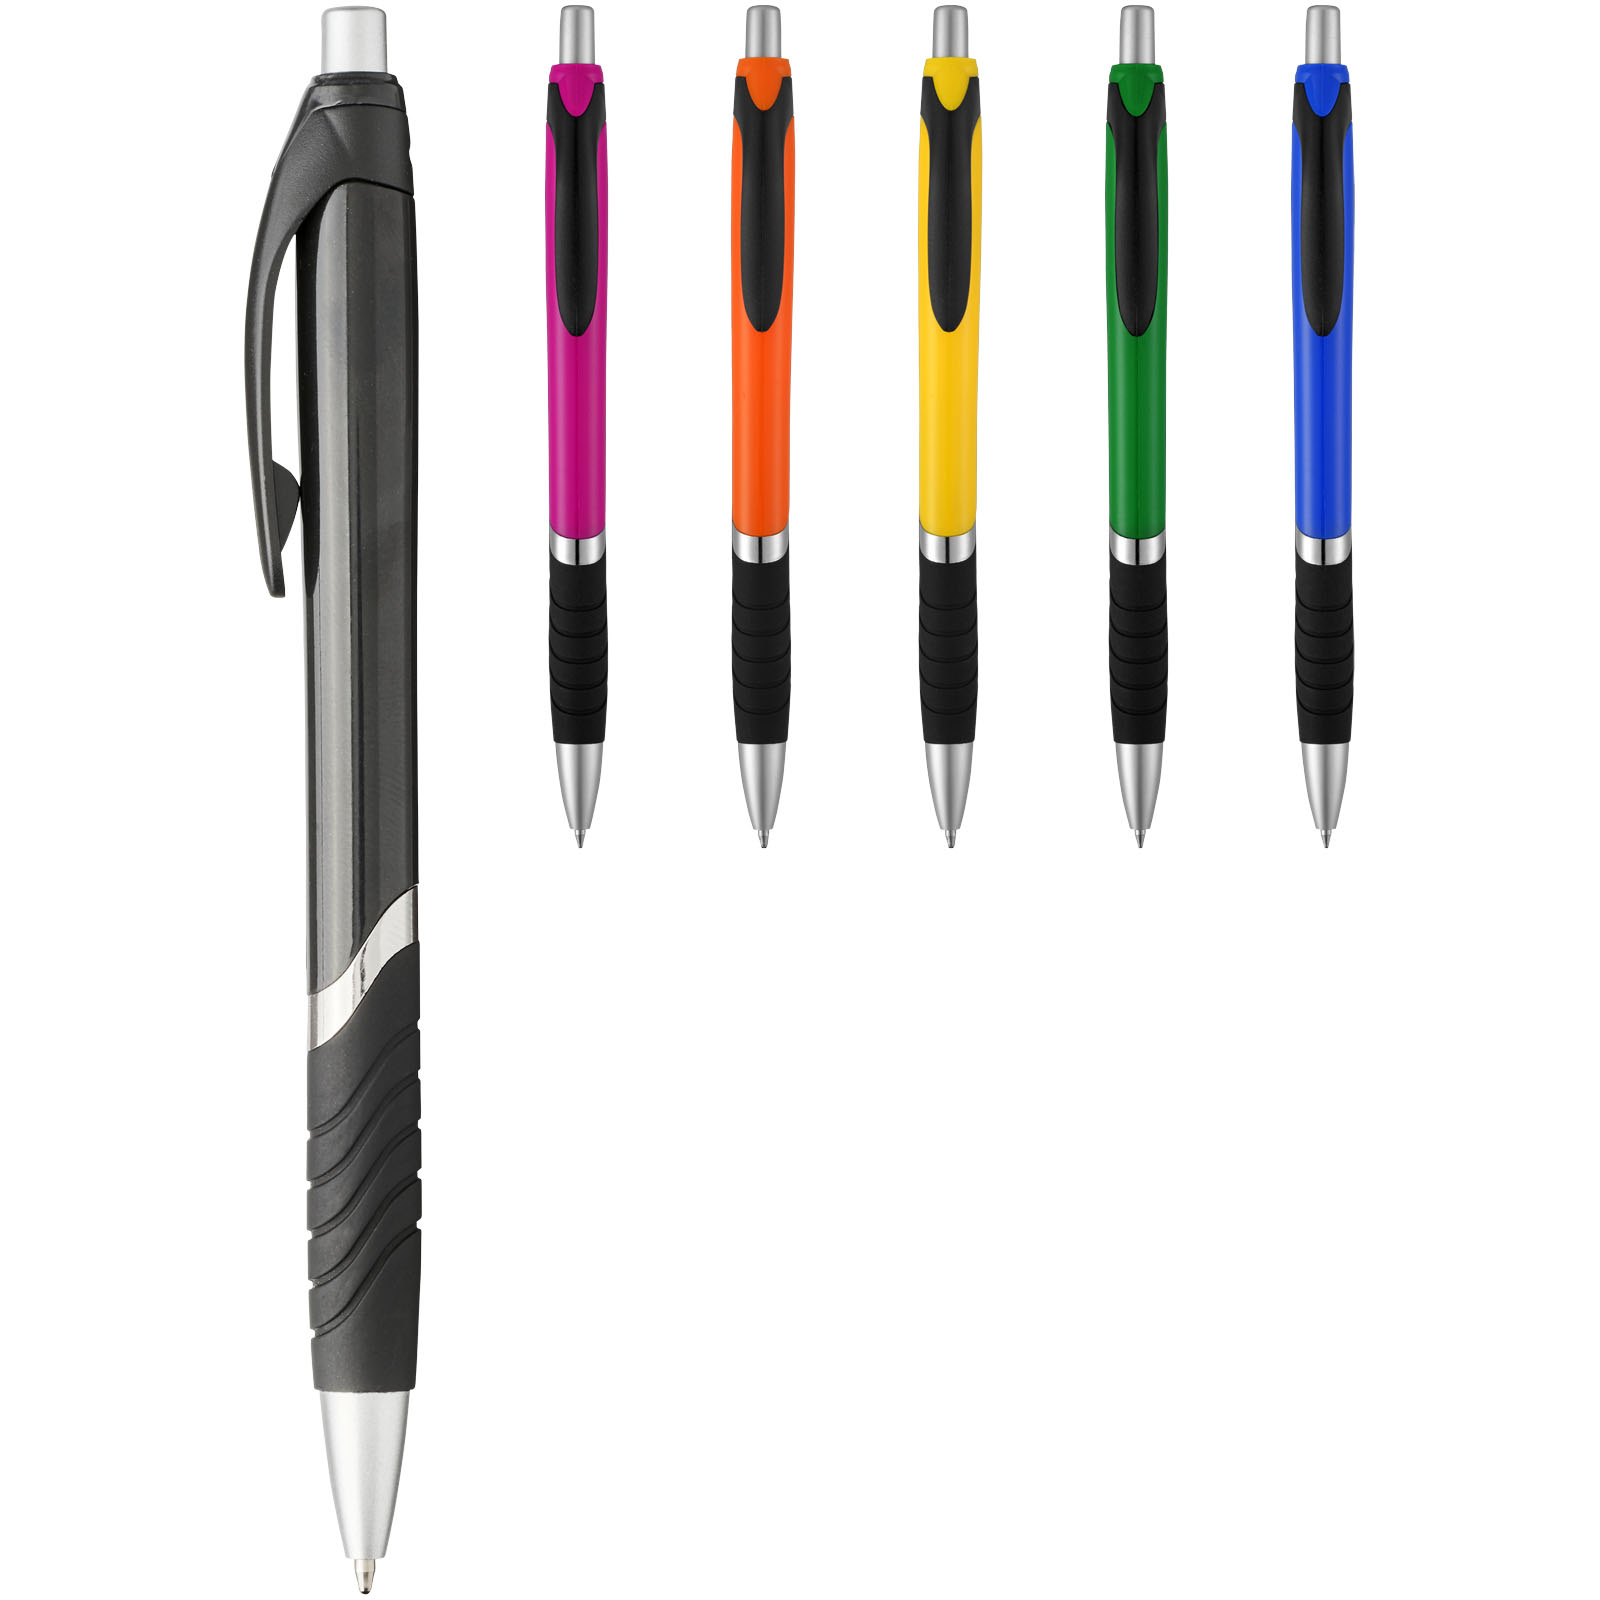 Pens & Writing - Turbo ballpoint pen with rubber grip